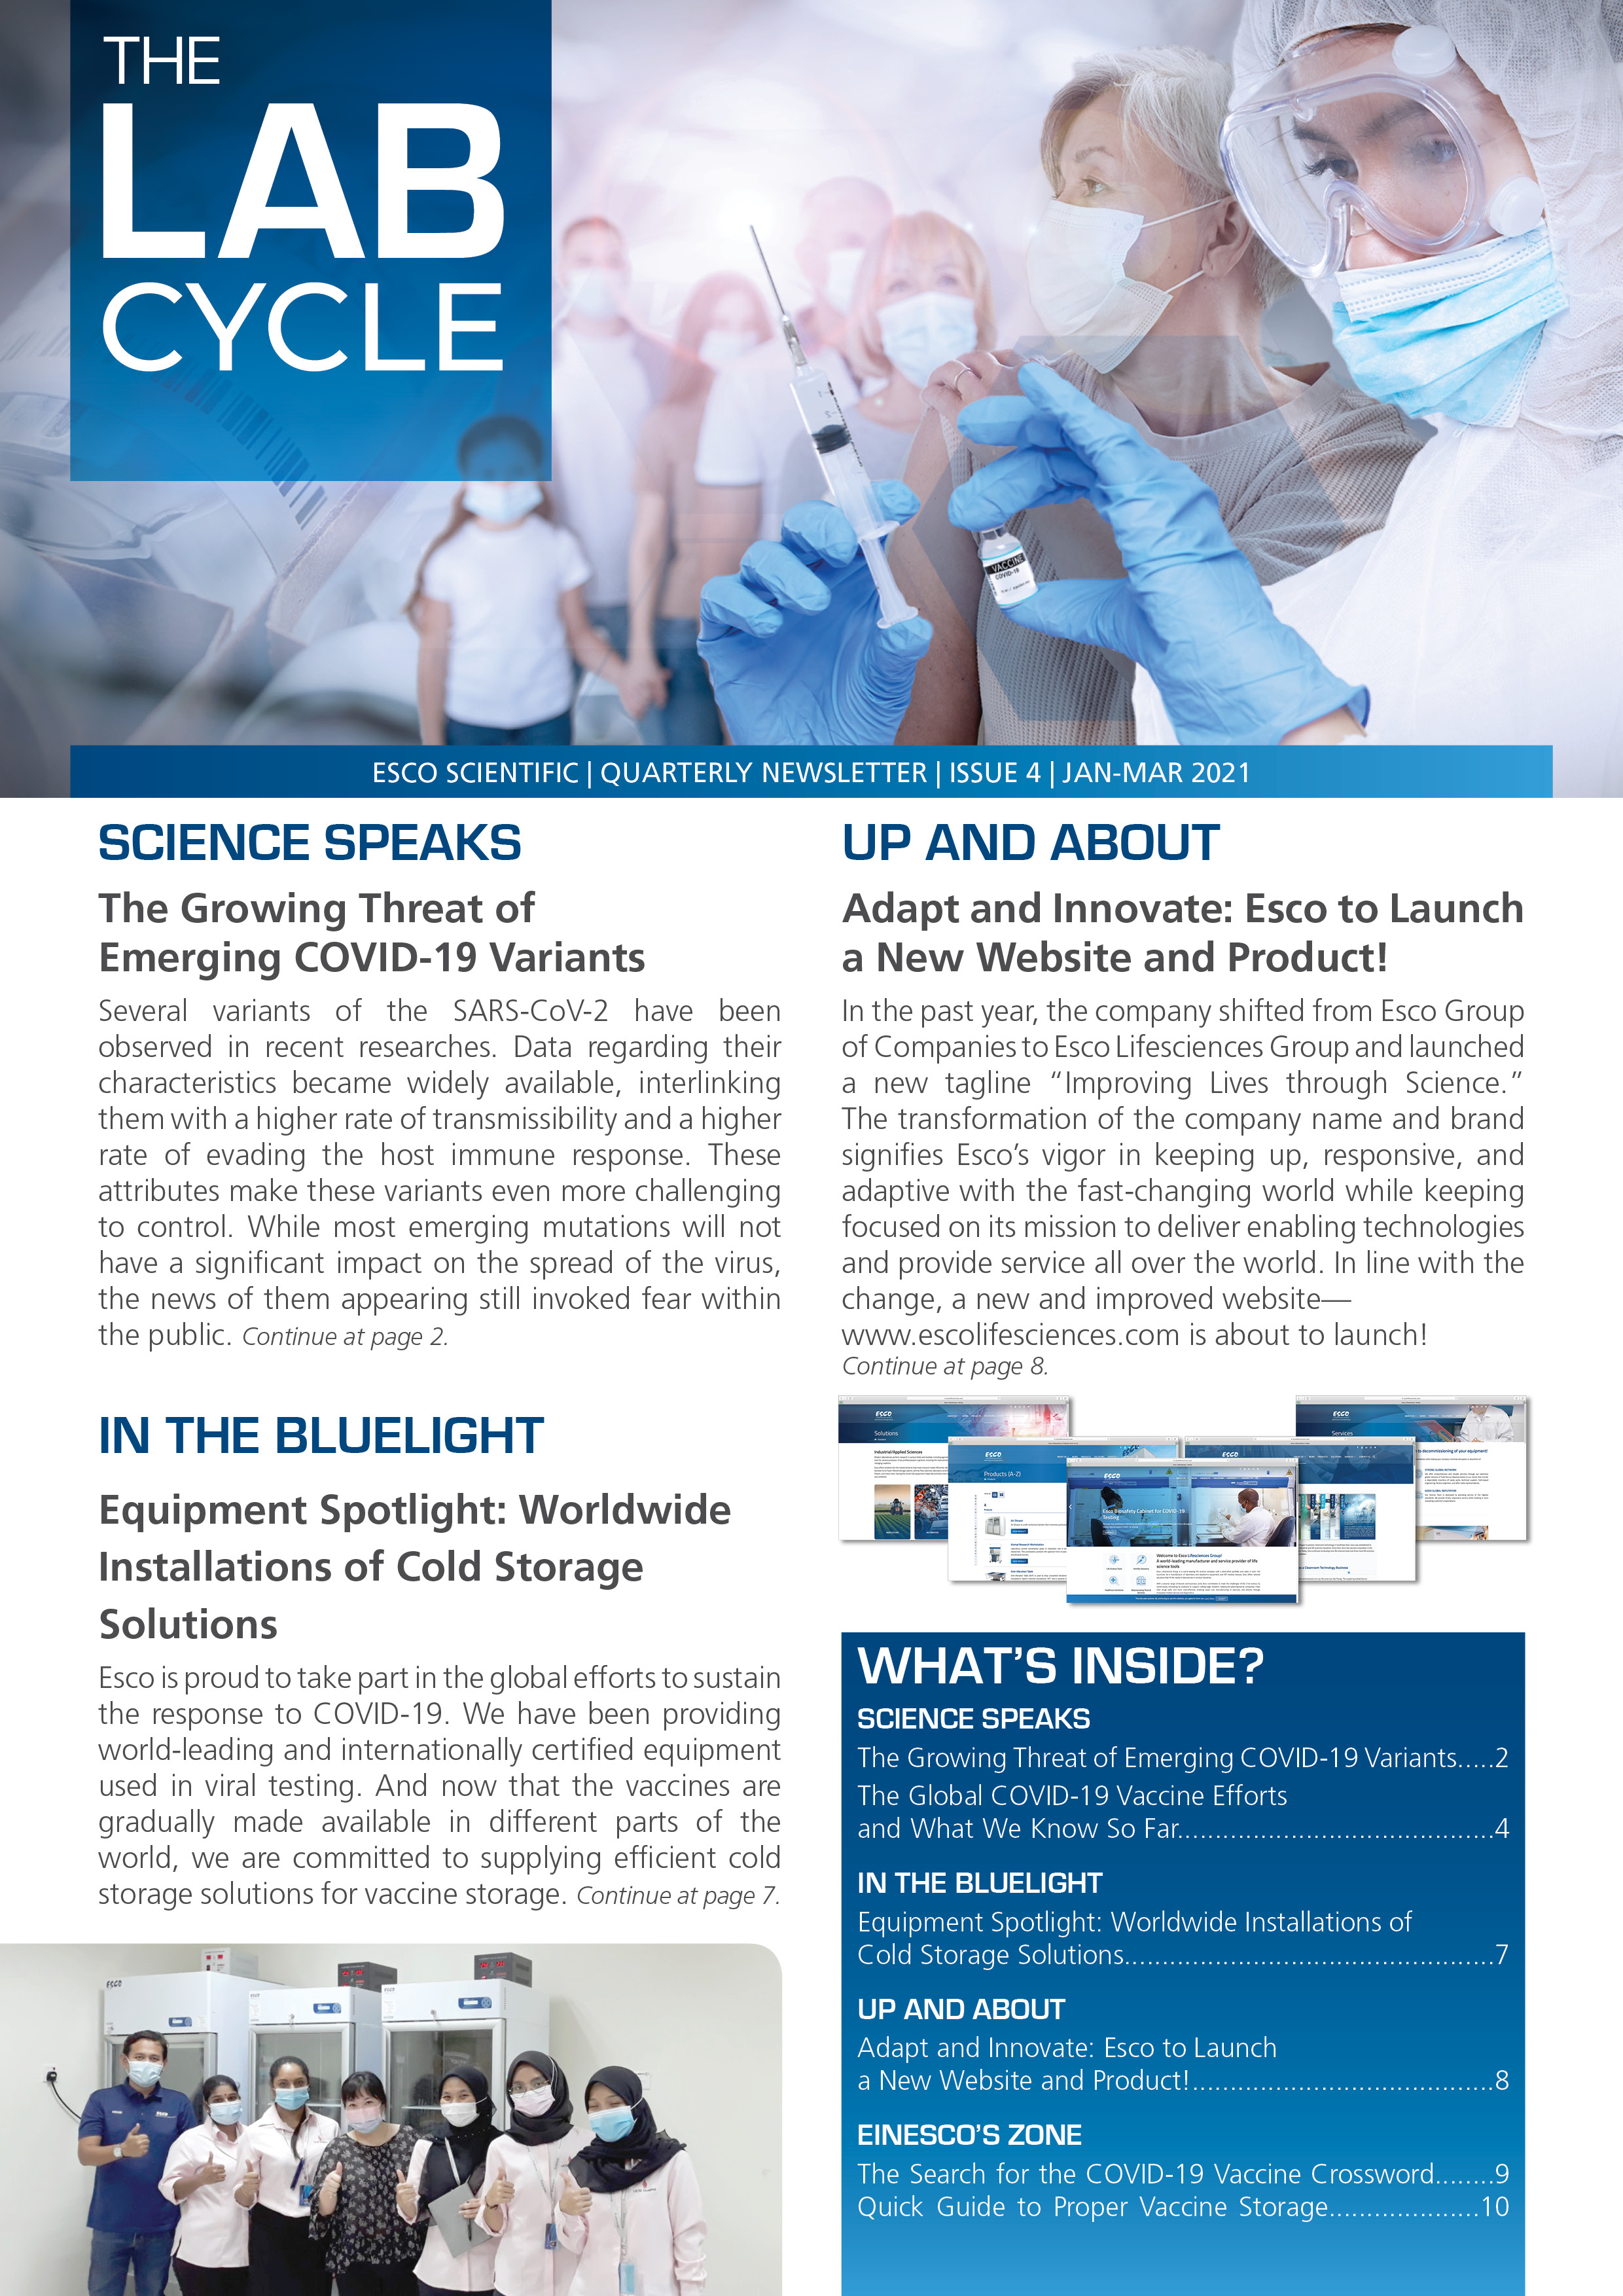 The Lab Cycle: Esco Scientific Quarterly Newsletter - Issue 4, Jan - Mar 2021